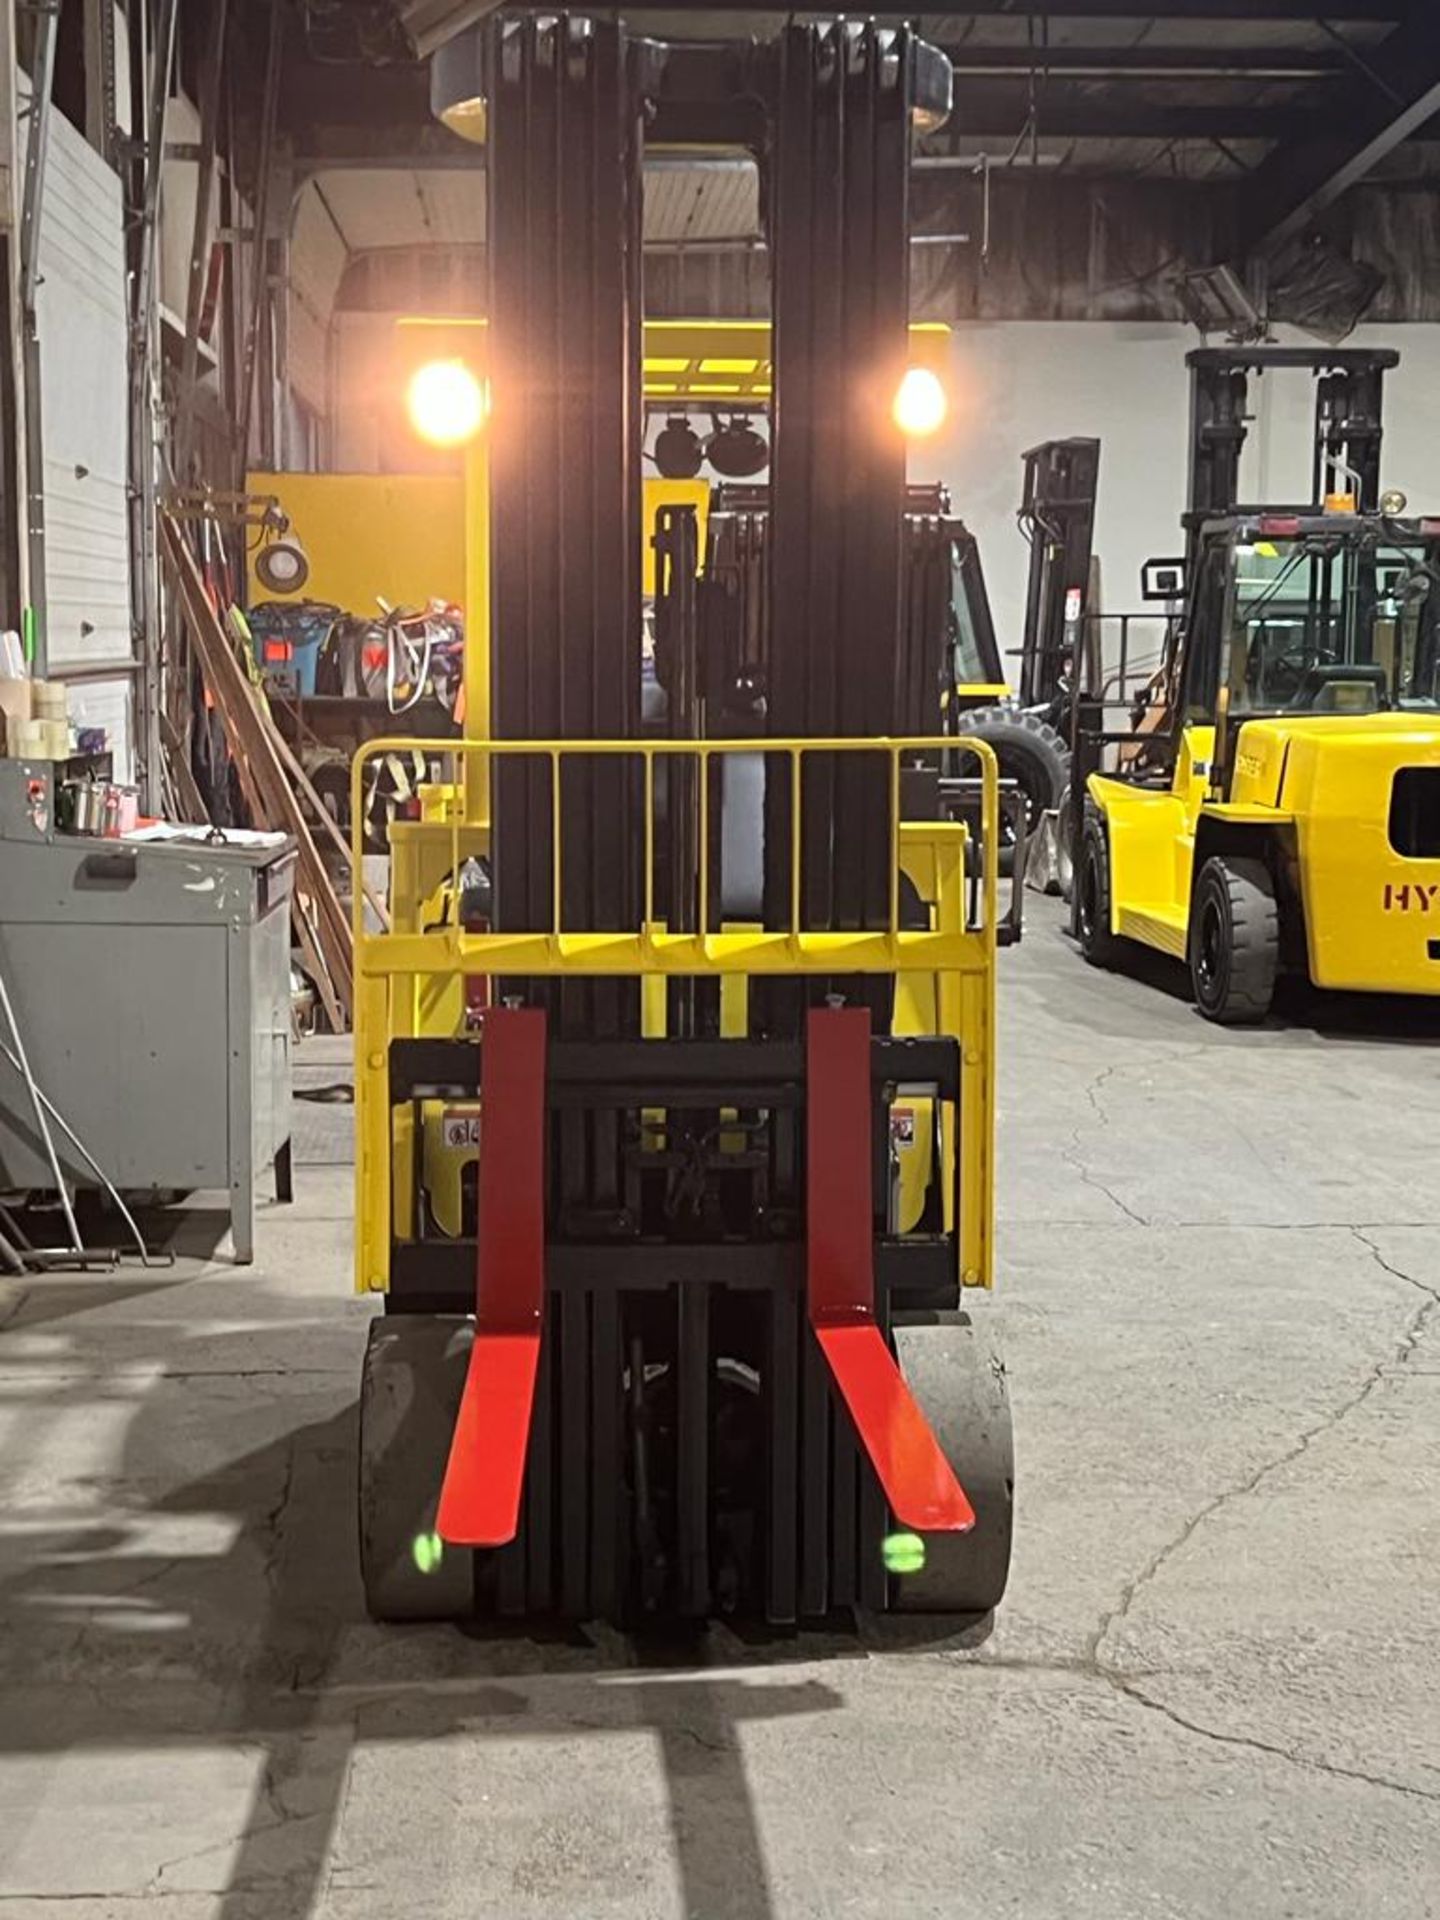 2017 Hyster 5,000lbs Capacity Forklift Electric with 48V Battery & 4-STAGE MAST with Sideshift - Image 3 of 5